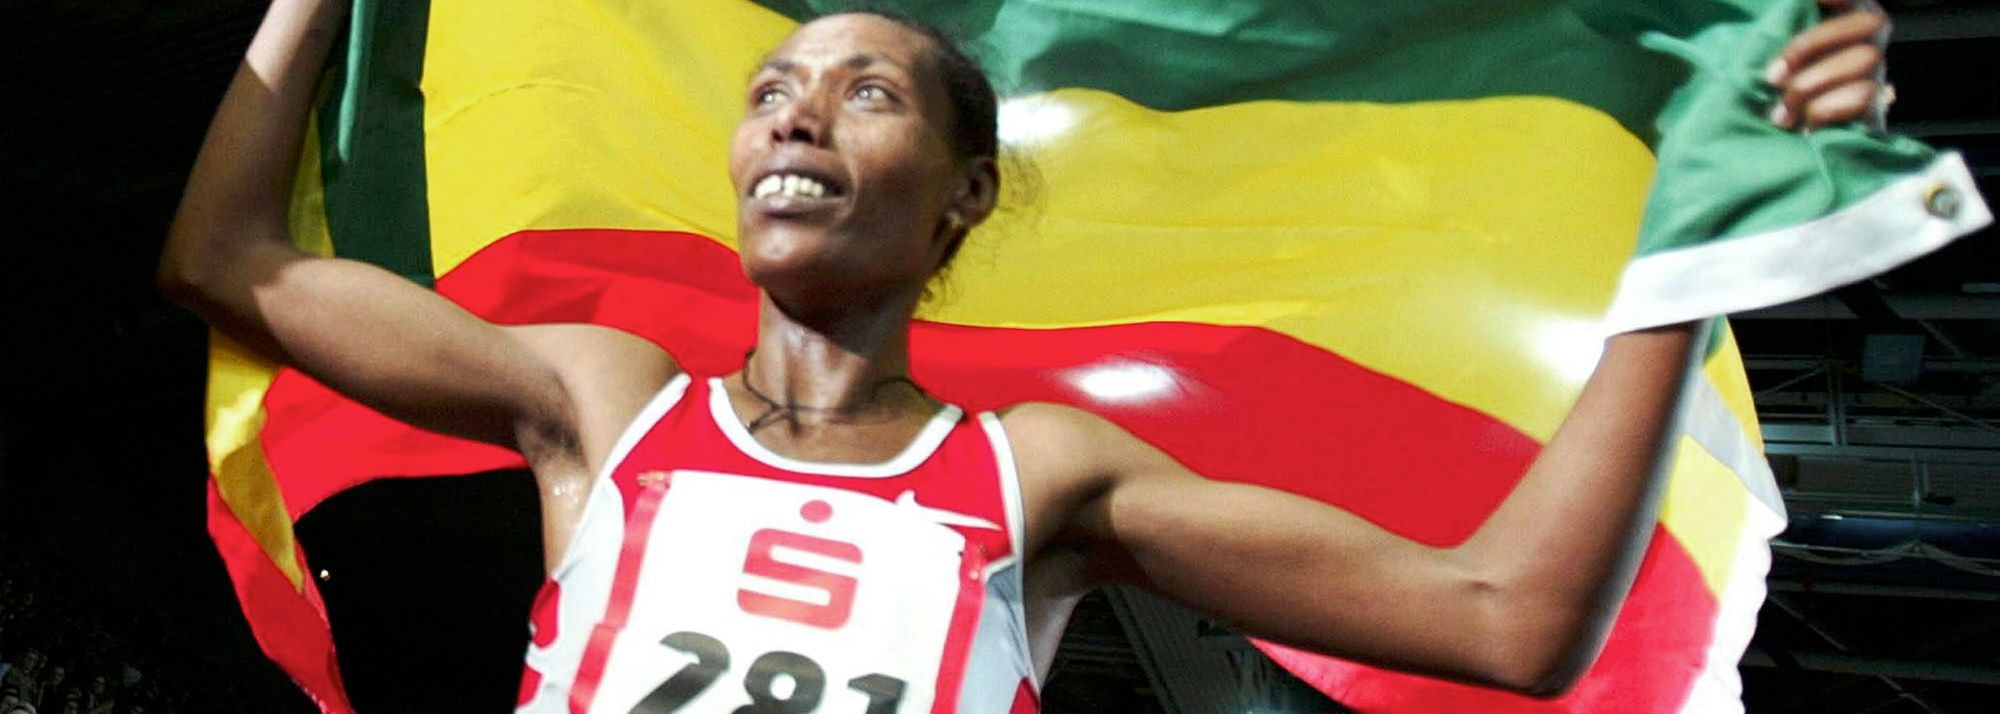 Berhane Adere got her first ever glimpse of an indoor track when she arrived at the Hanns-Martin-Schleyer-Halle in Stuttgart in 2002